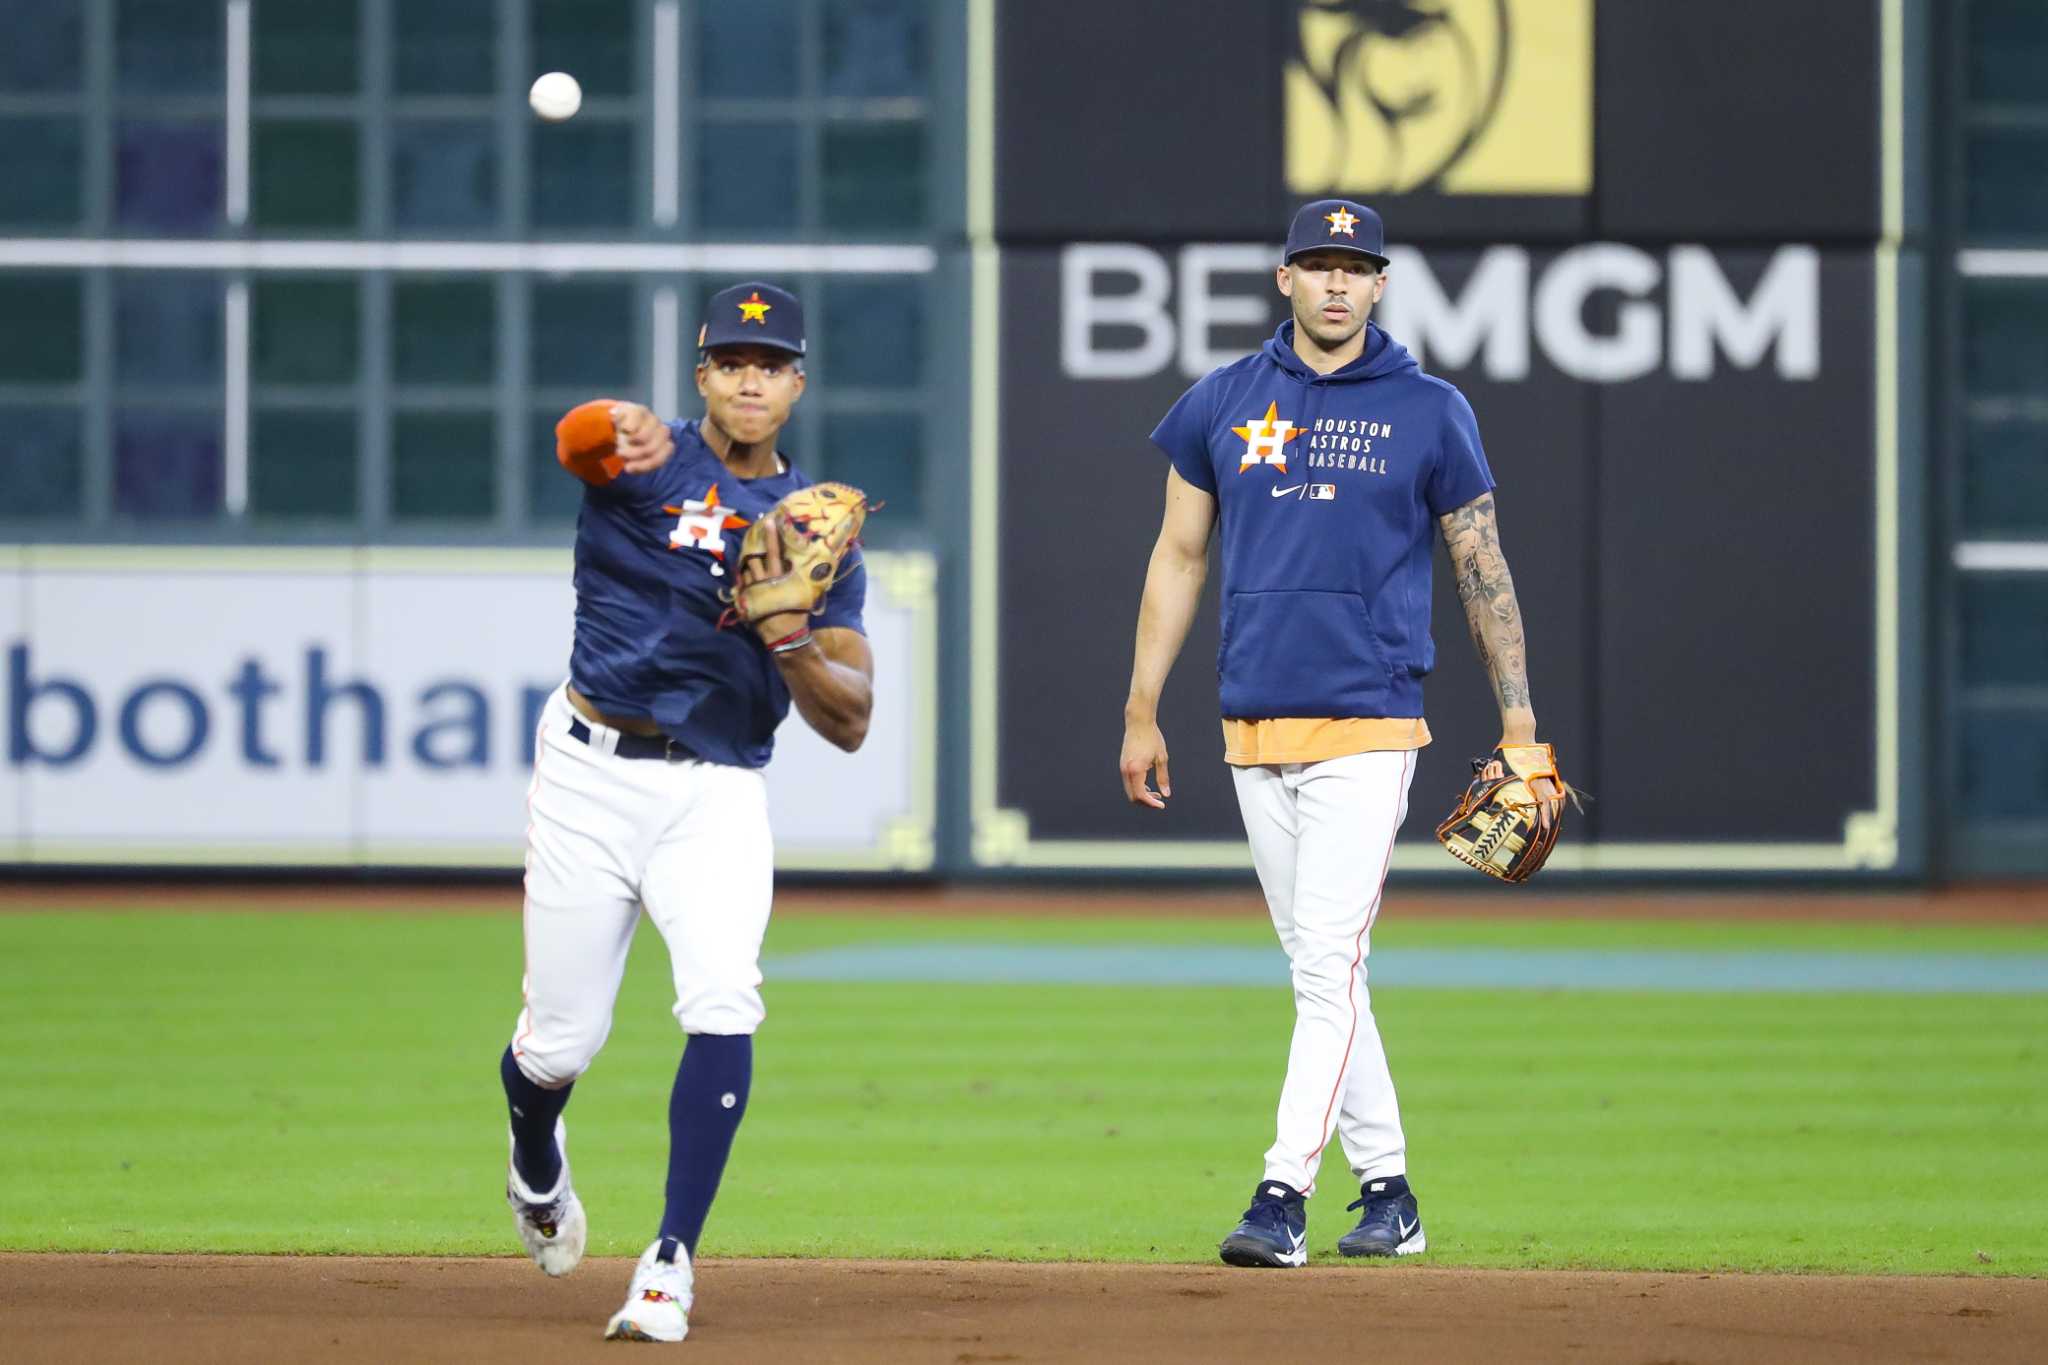 Jeremy Peña vs. Carlos Correa: How the young upstart compares to the World  Series champ